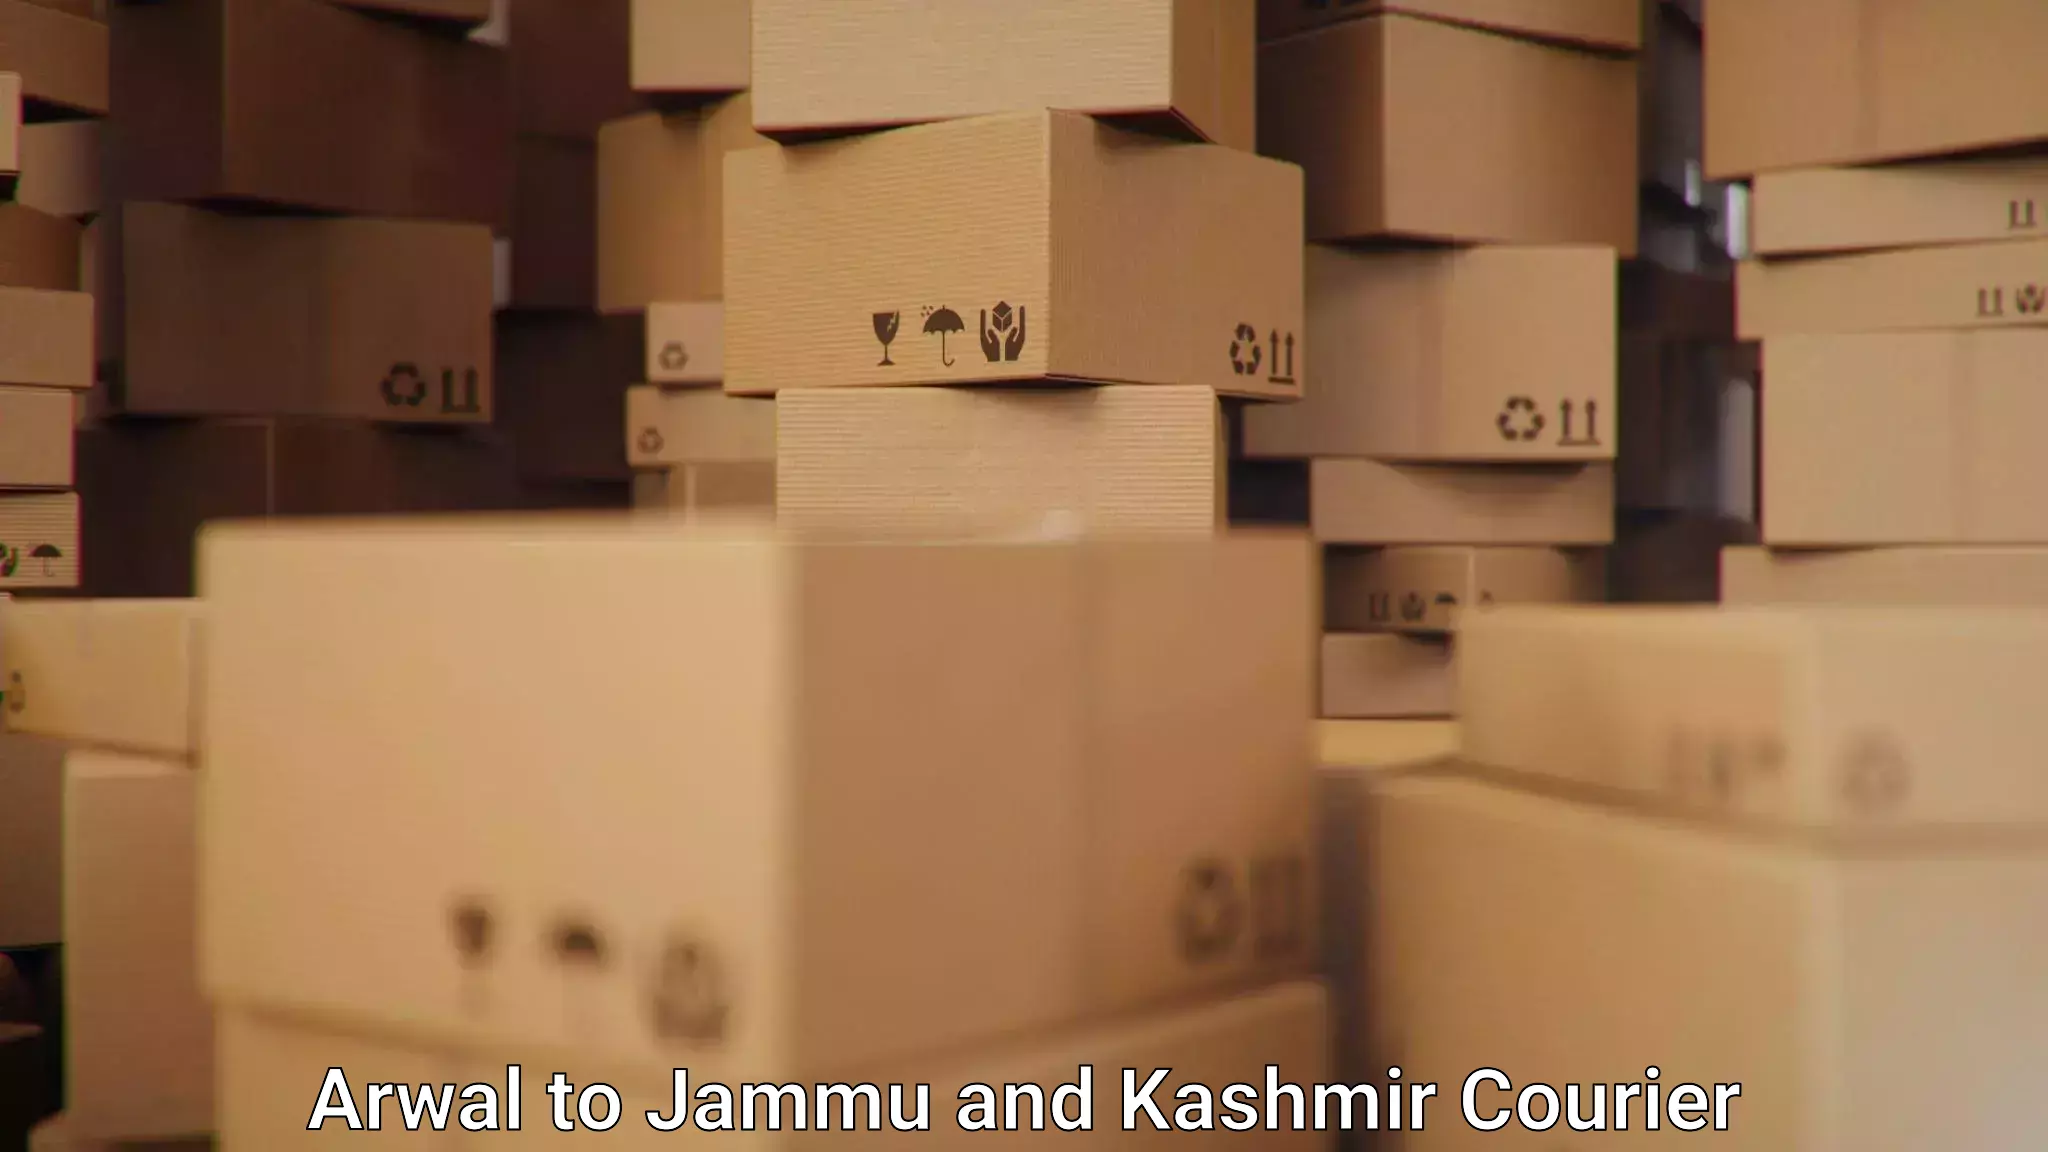 Sustainable shipping practices Arwal to Jammu and Kashmir